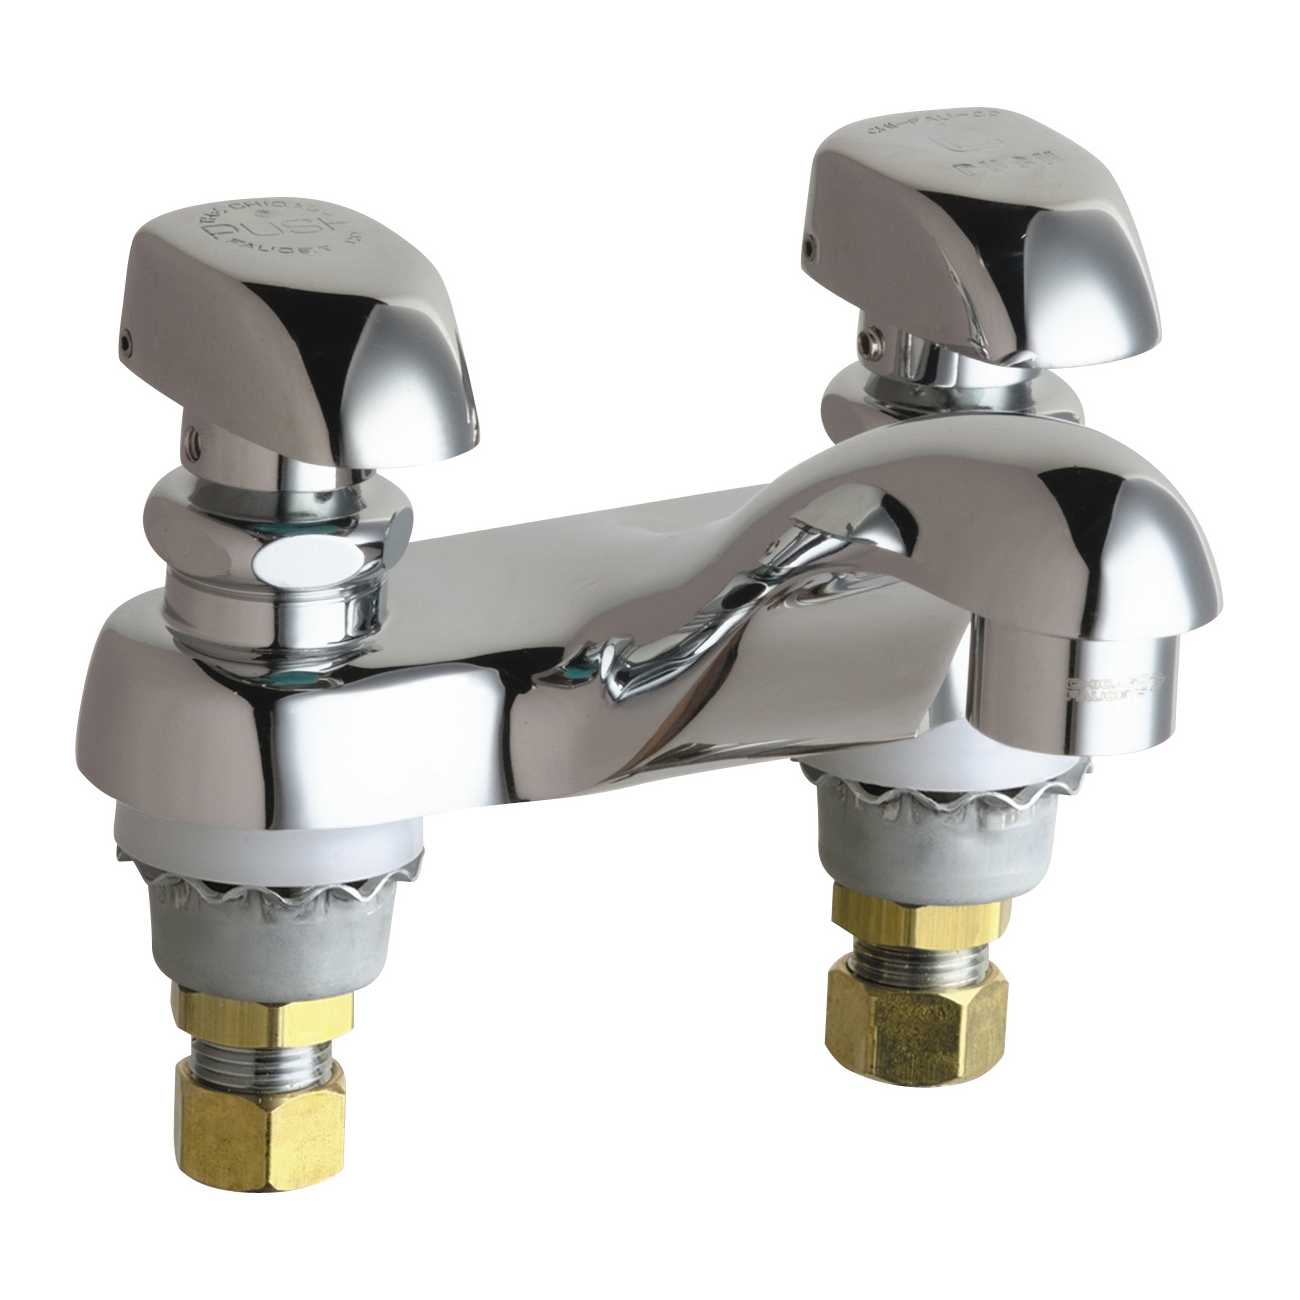 Chicago Faucet® 802-V335ABCP Lavatory Sink Faucet, Chrome Plated, 2 Handles, 2.2 gpm